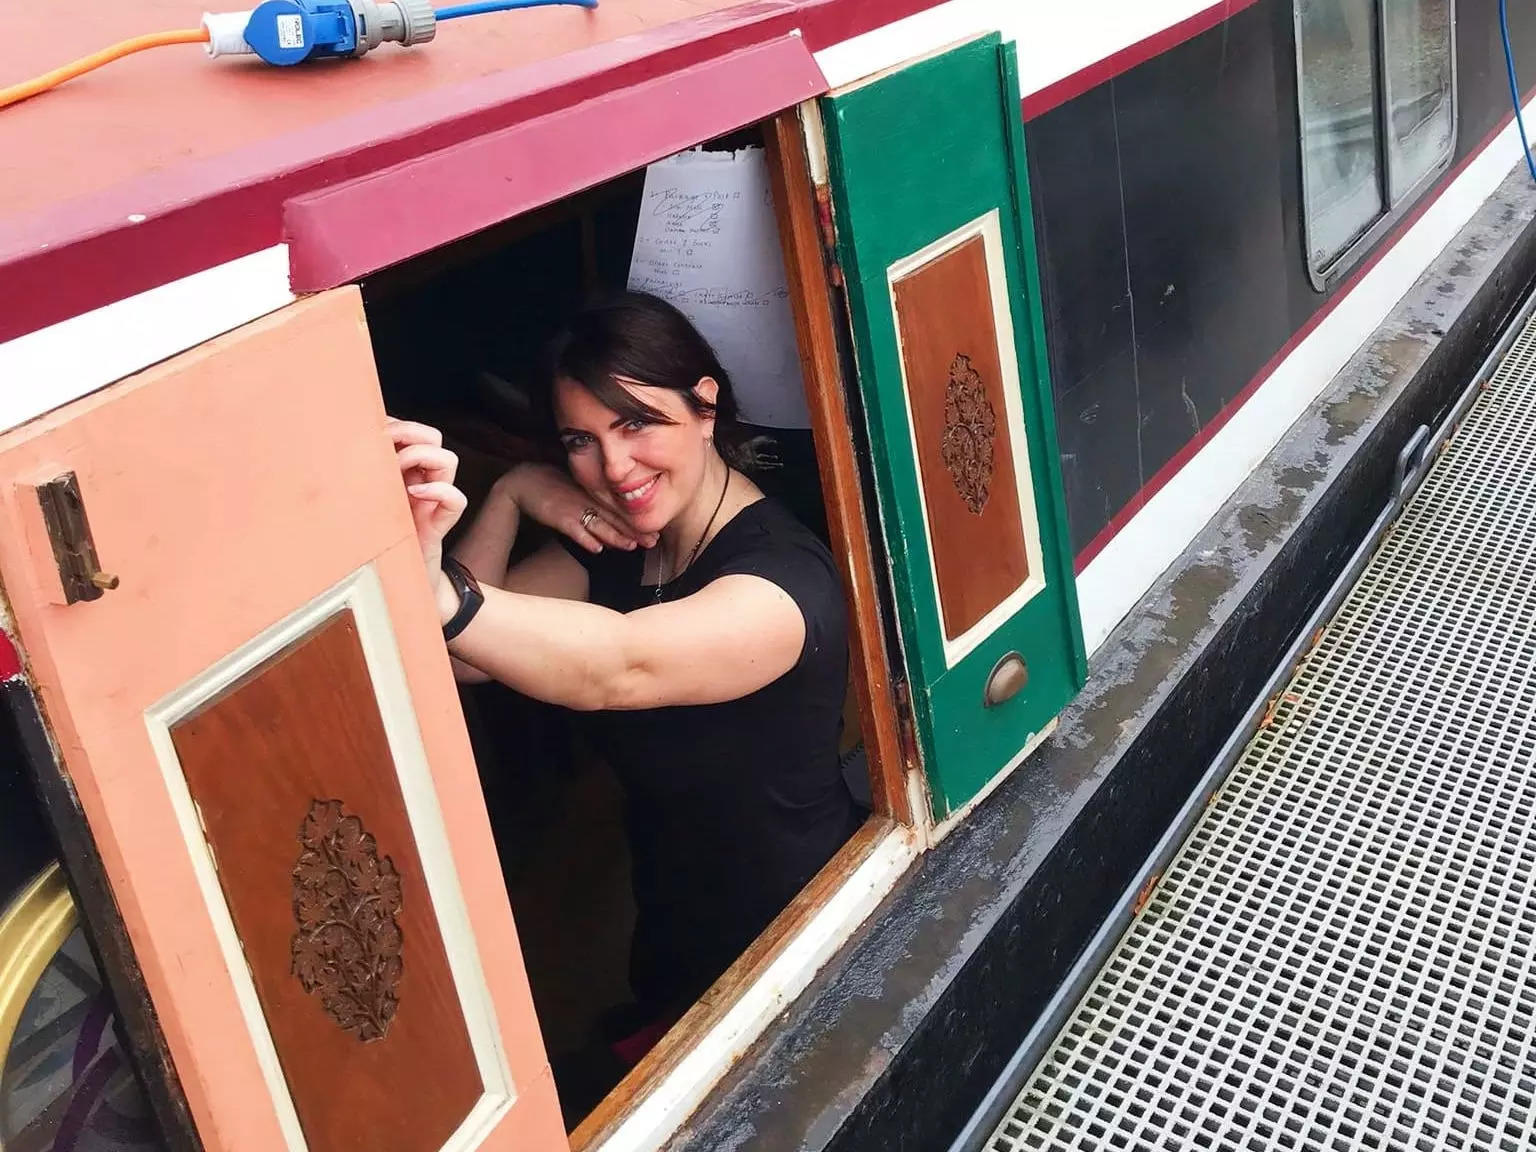 A woman onboard a narrowboat in England